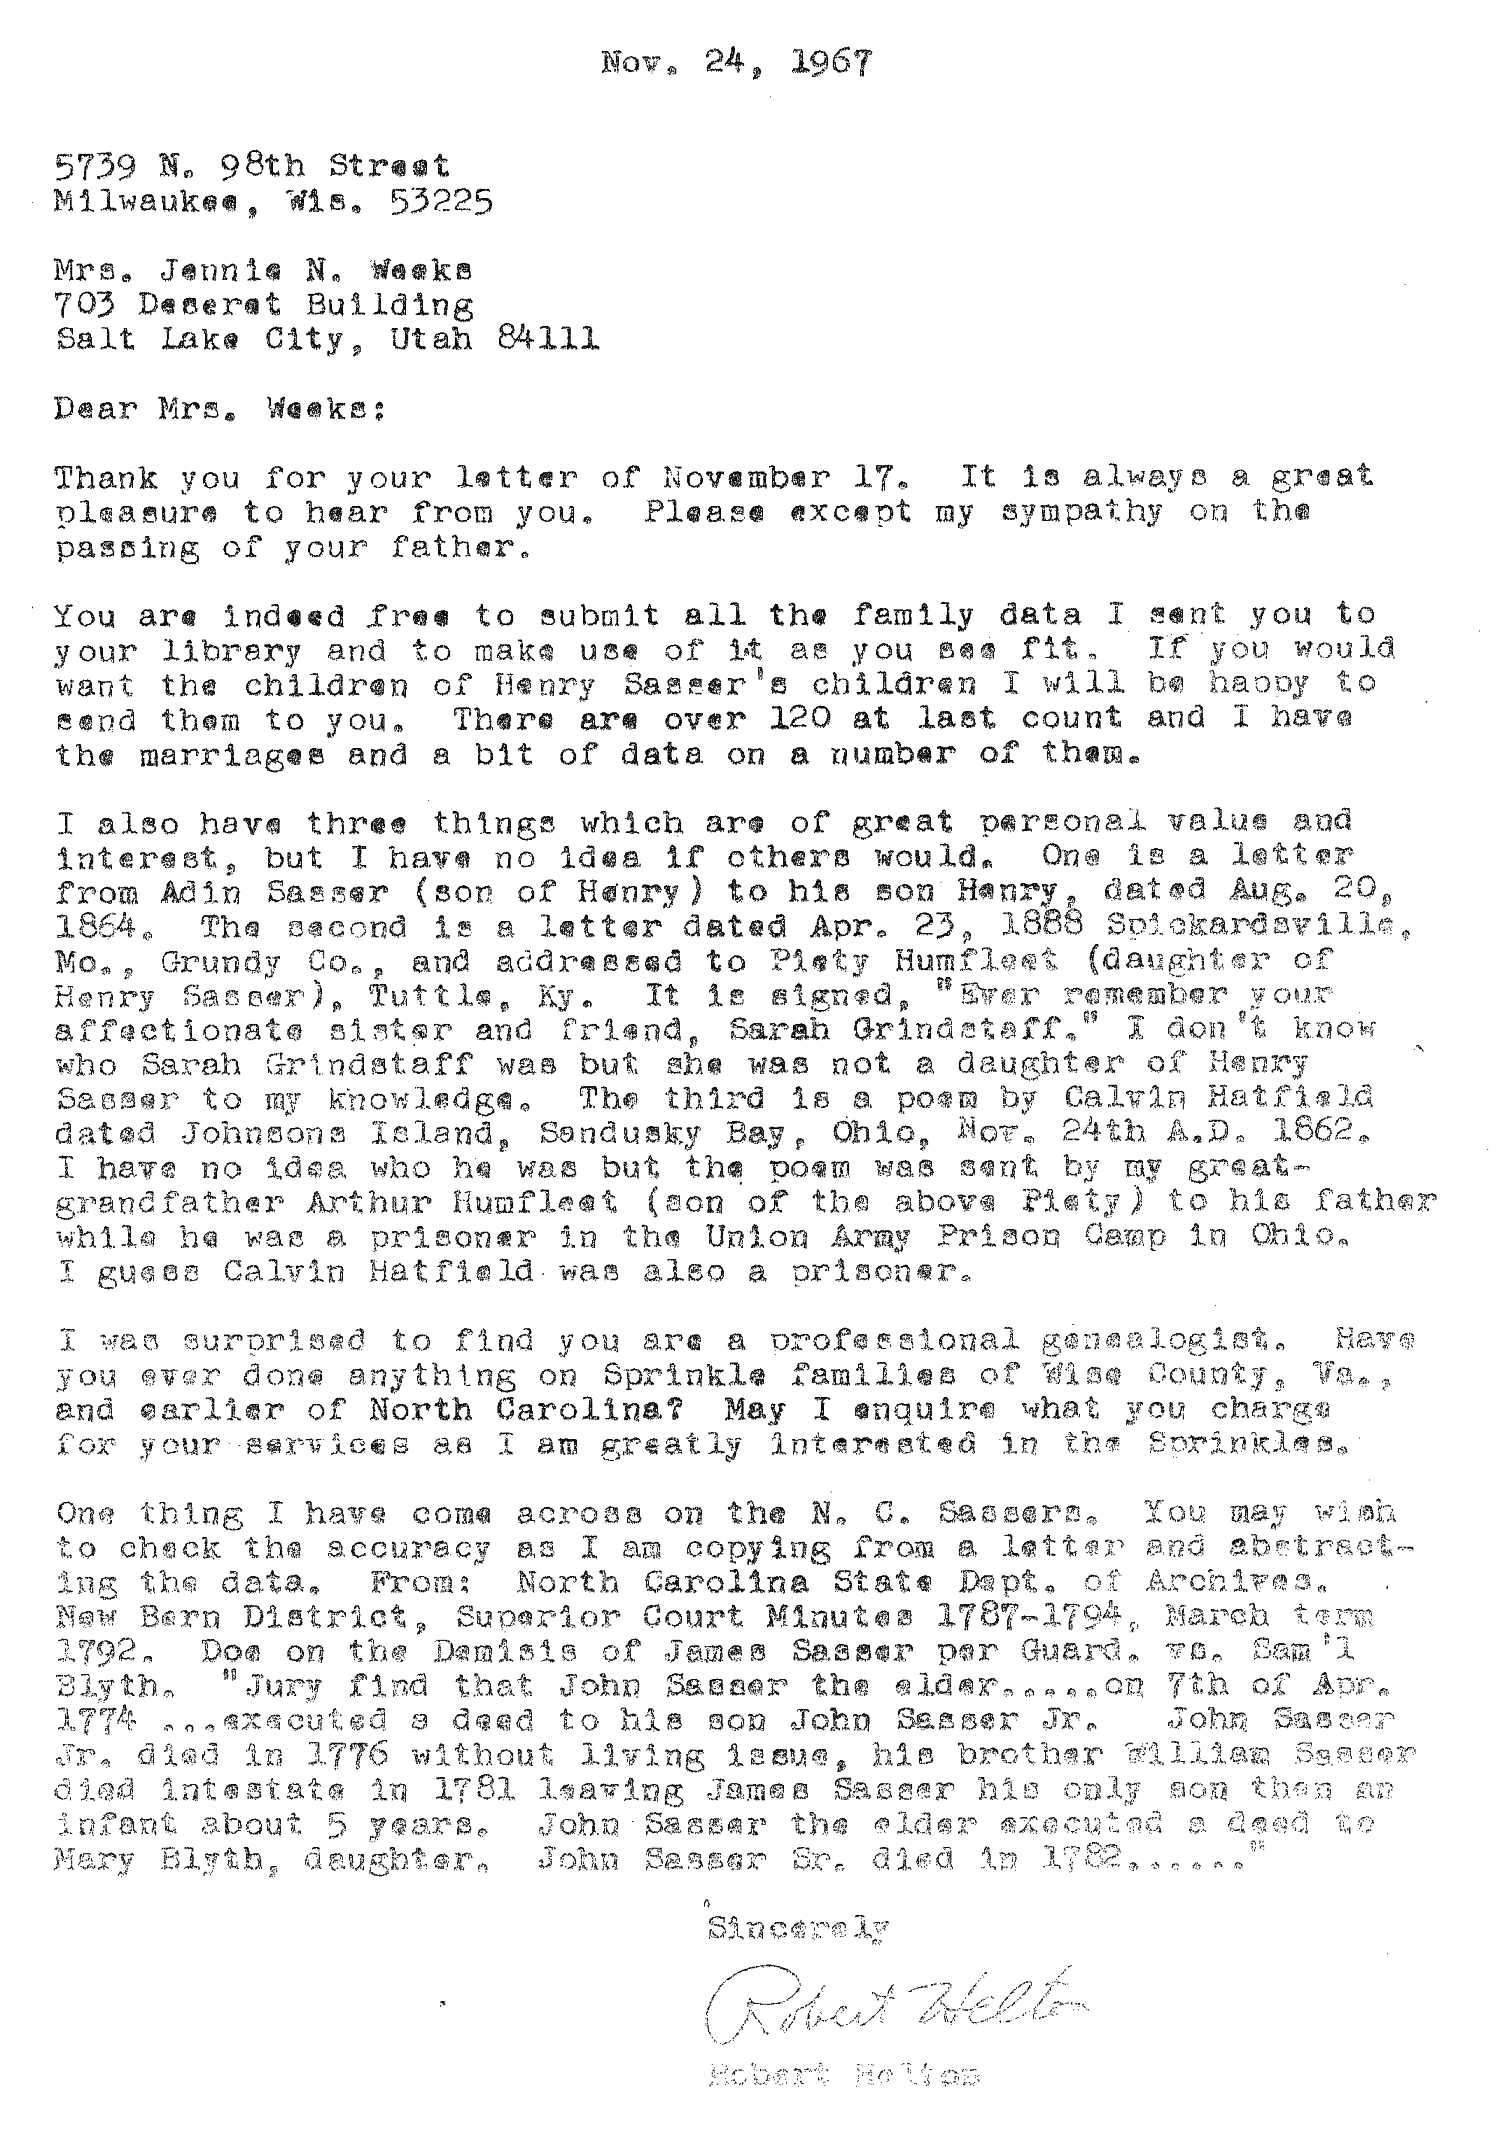 Letter from Robert Helton 3small